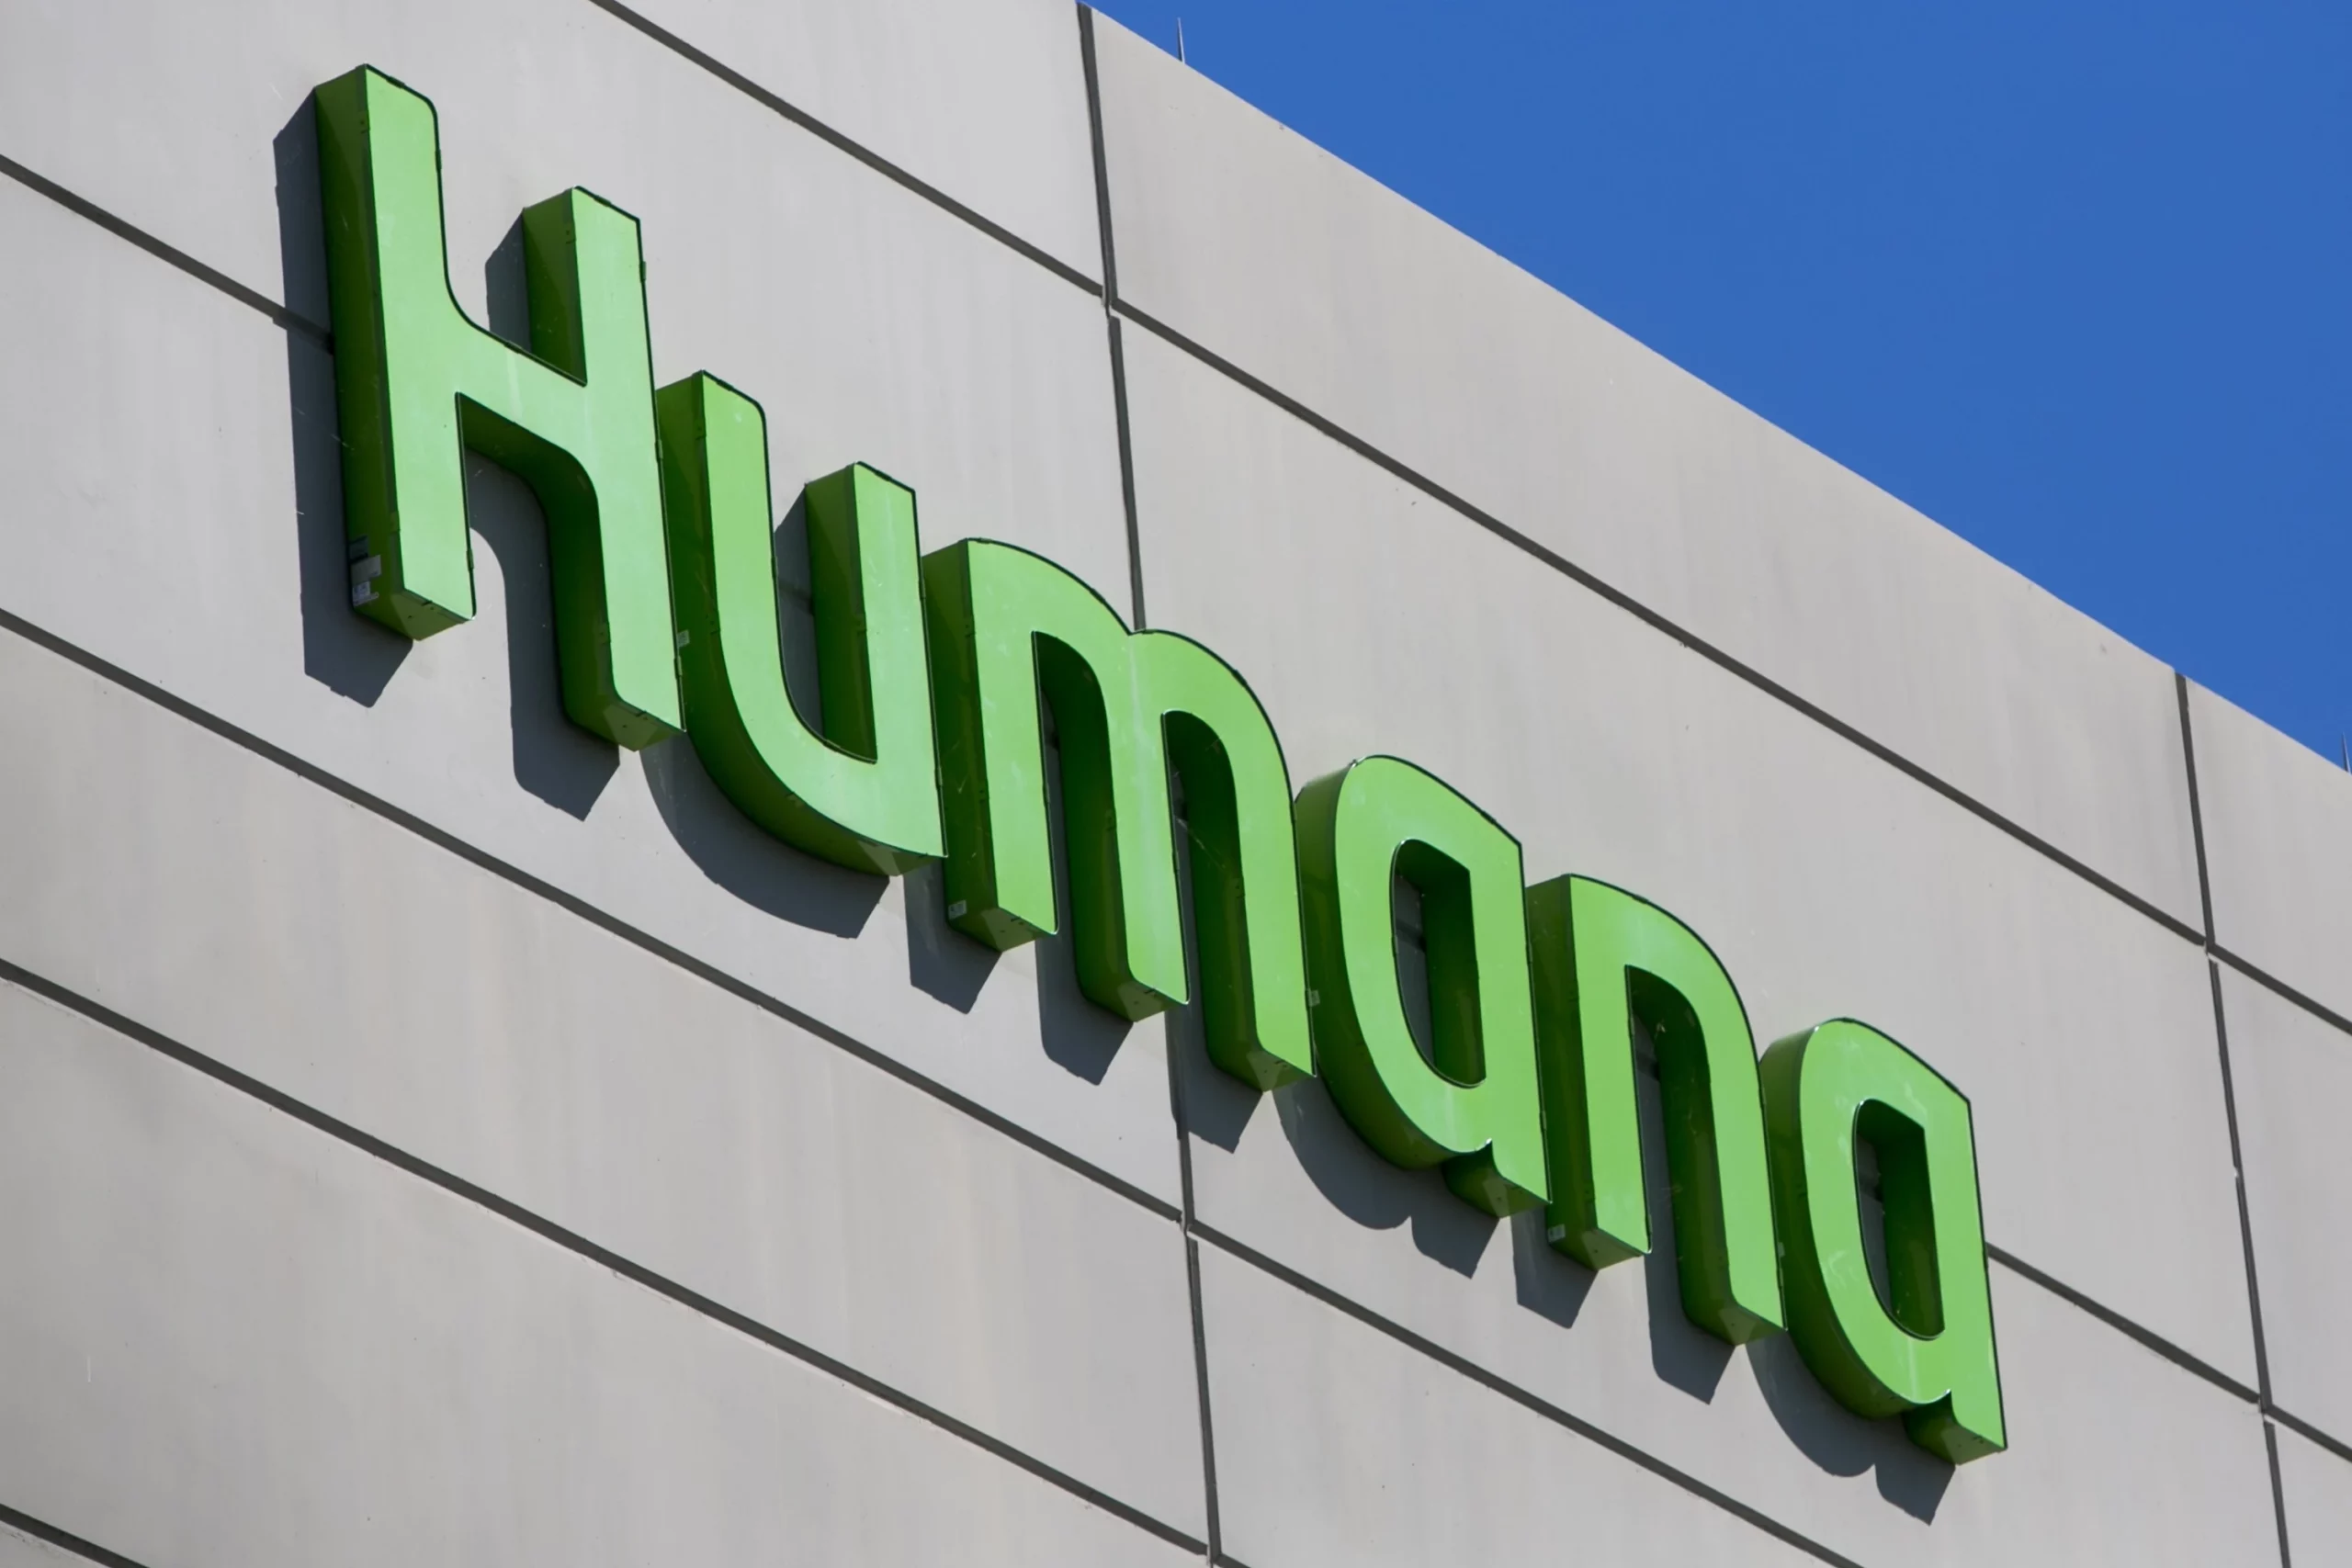 Carolina Health Specialists To Be In Network With Humana Medicare Effective 1/1/2021